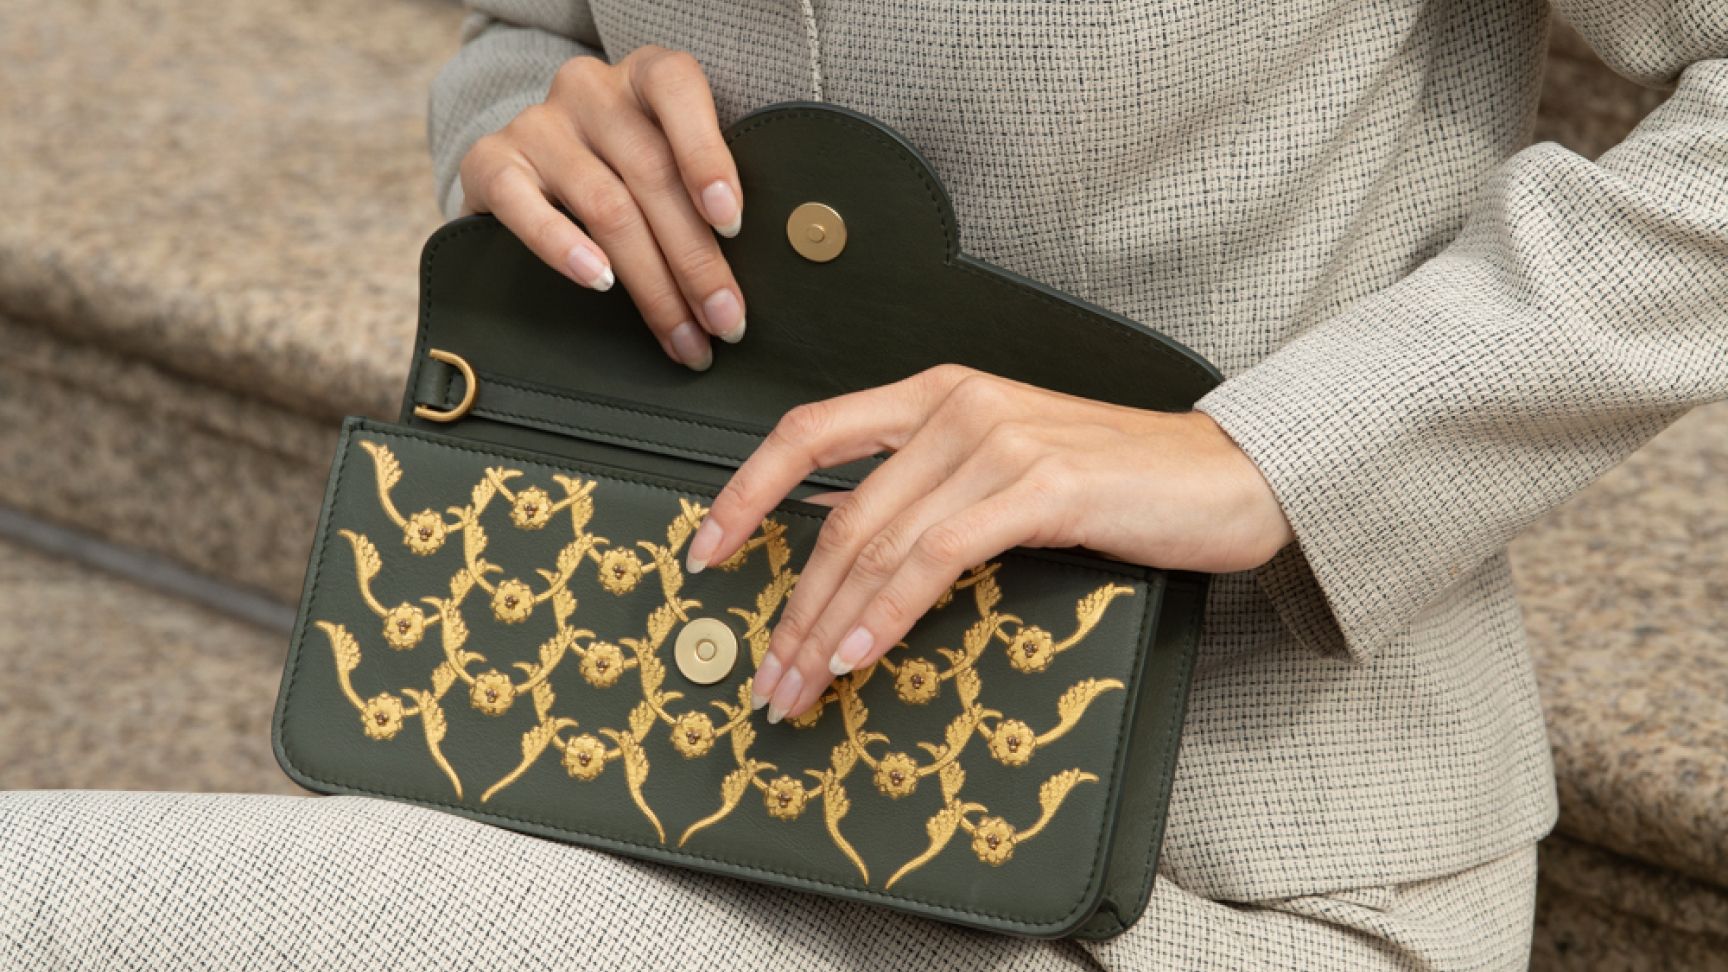 A woman carrying The elegant Charvi clutch featuring gold gilding